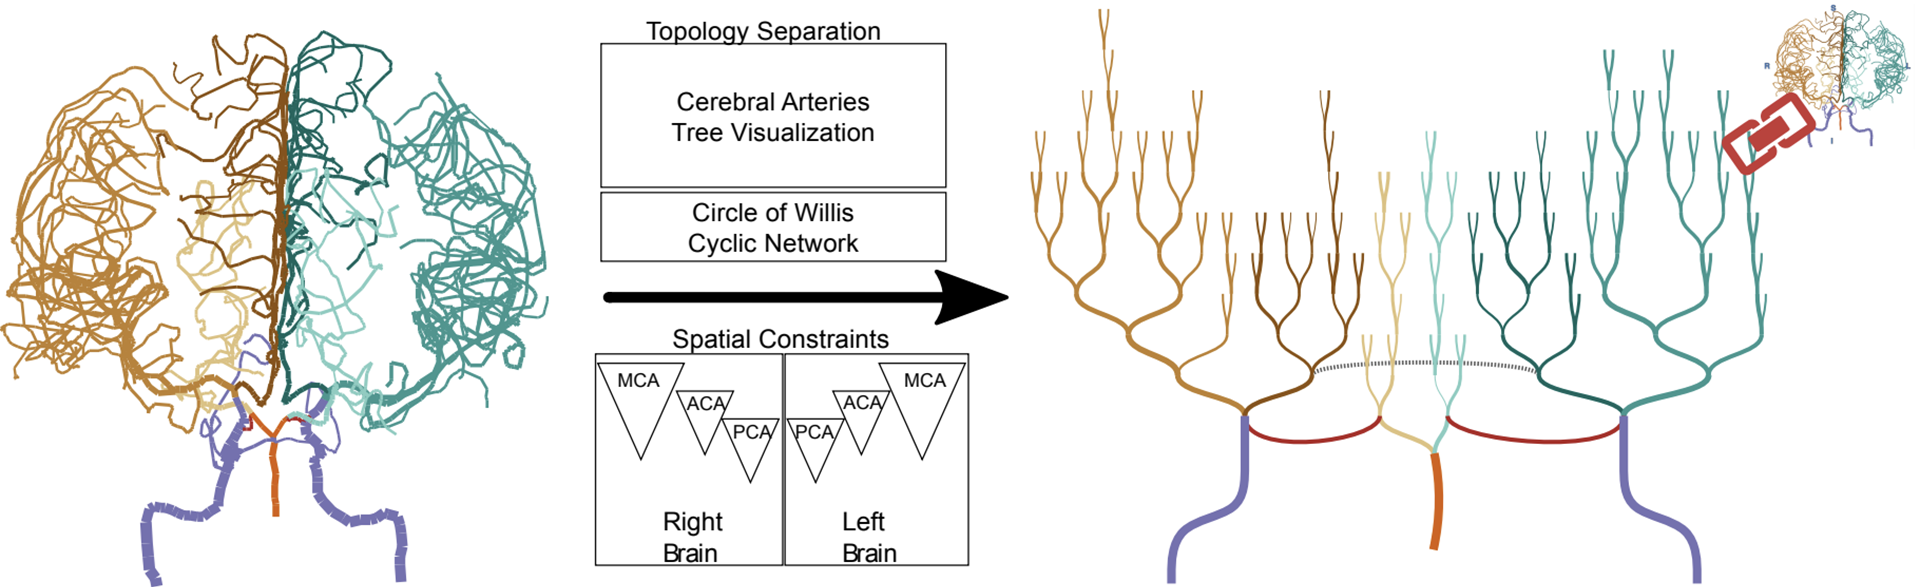 Illustration showing how the brain arteries in a 2D isosurface visualization can be mapped using toplogy separation and spatial constraints into a 2D abstract network layout.